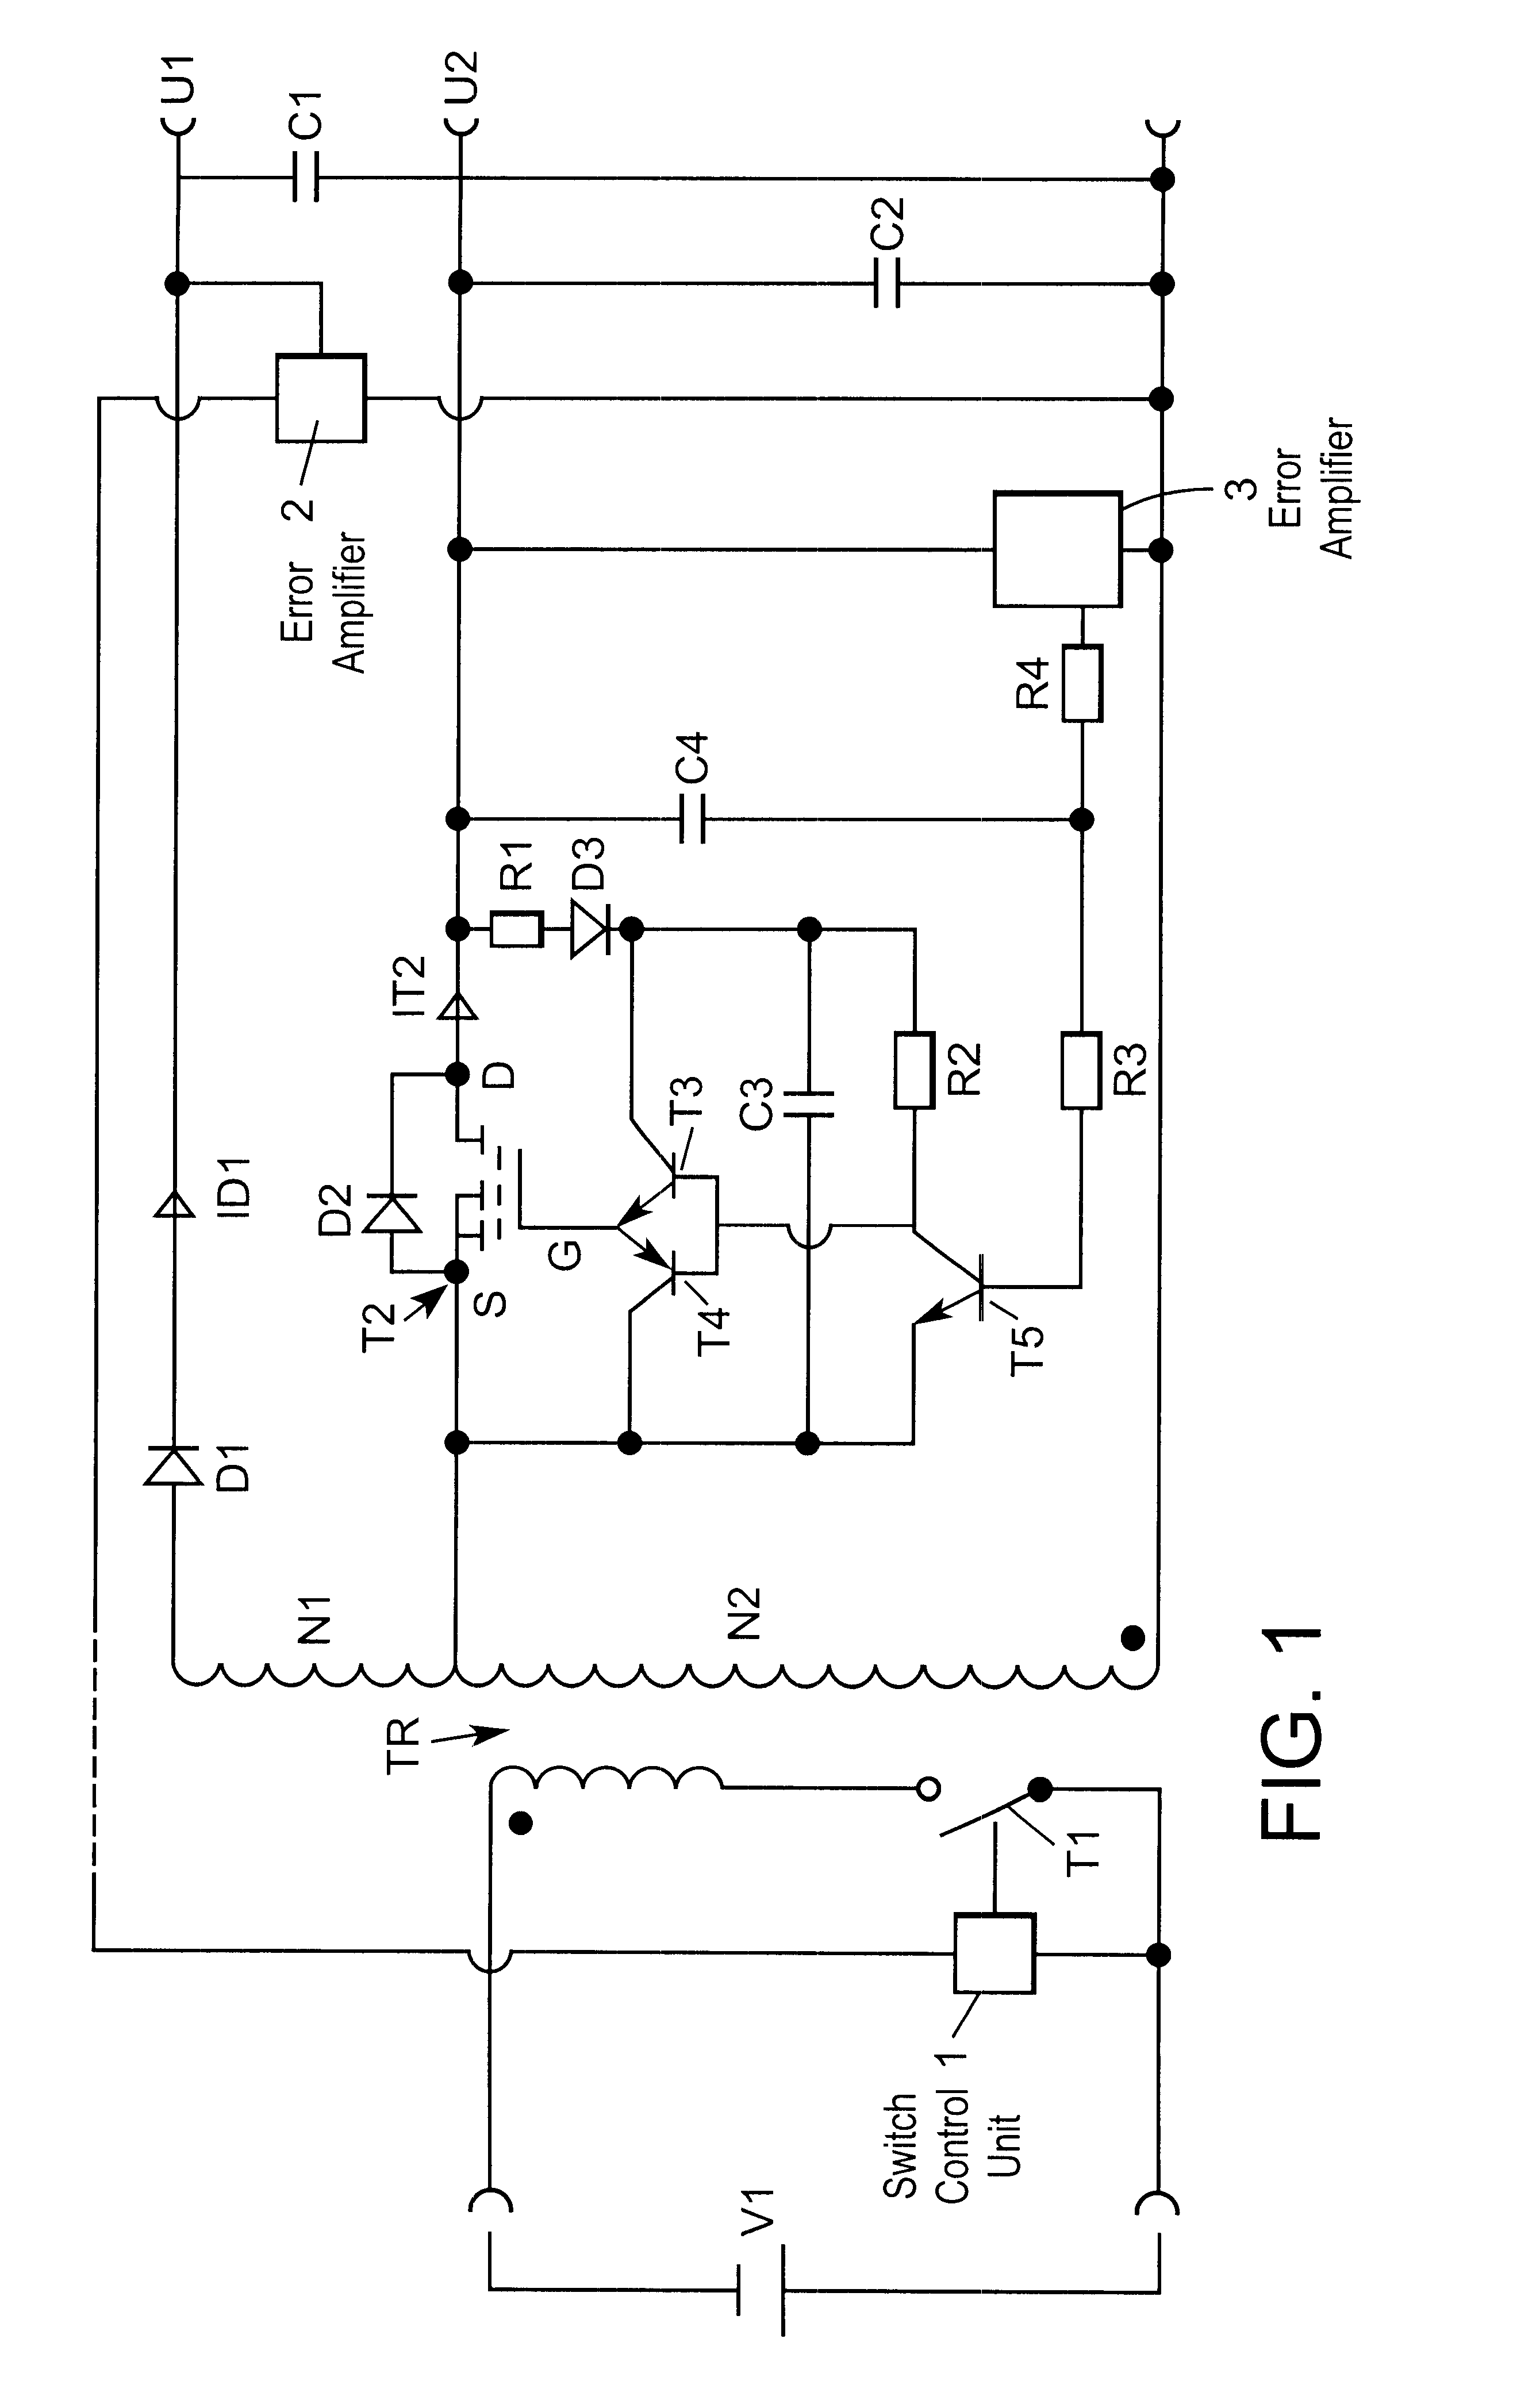 Method and arrangement for regulating low output voltages in multiple output flyback DC/DC converters